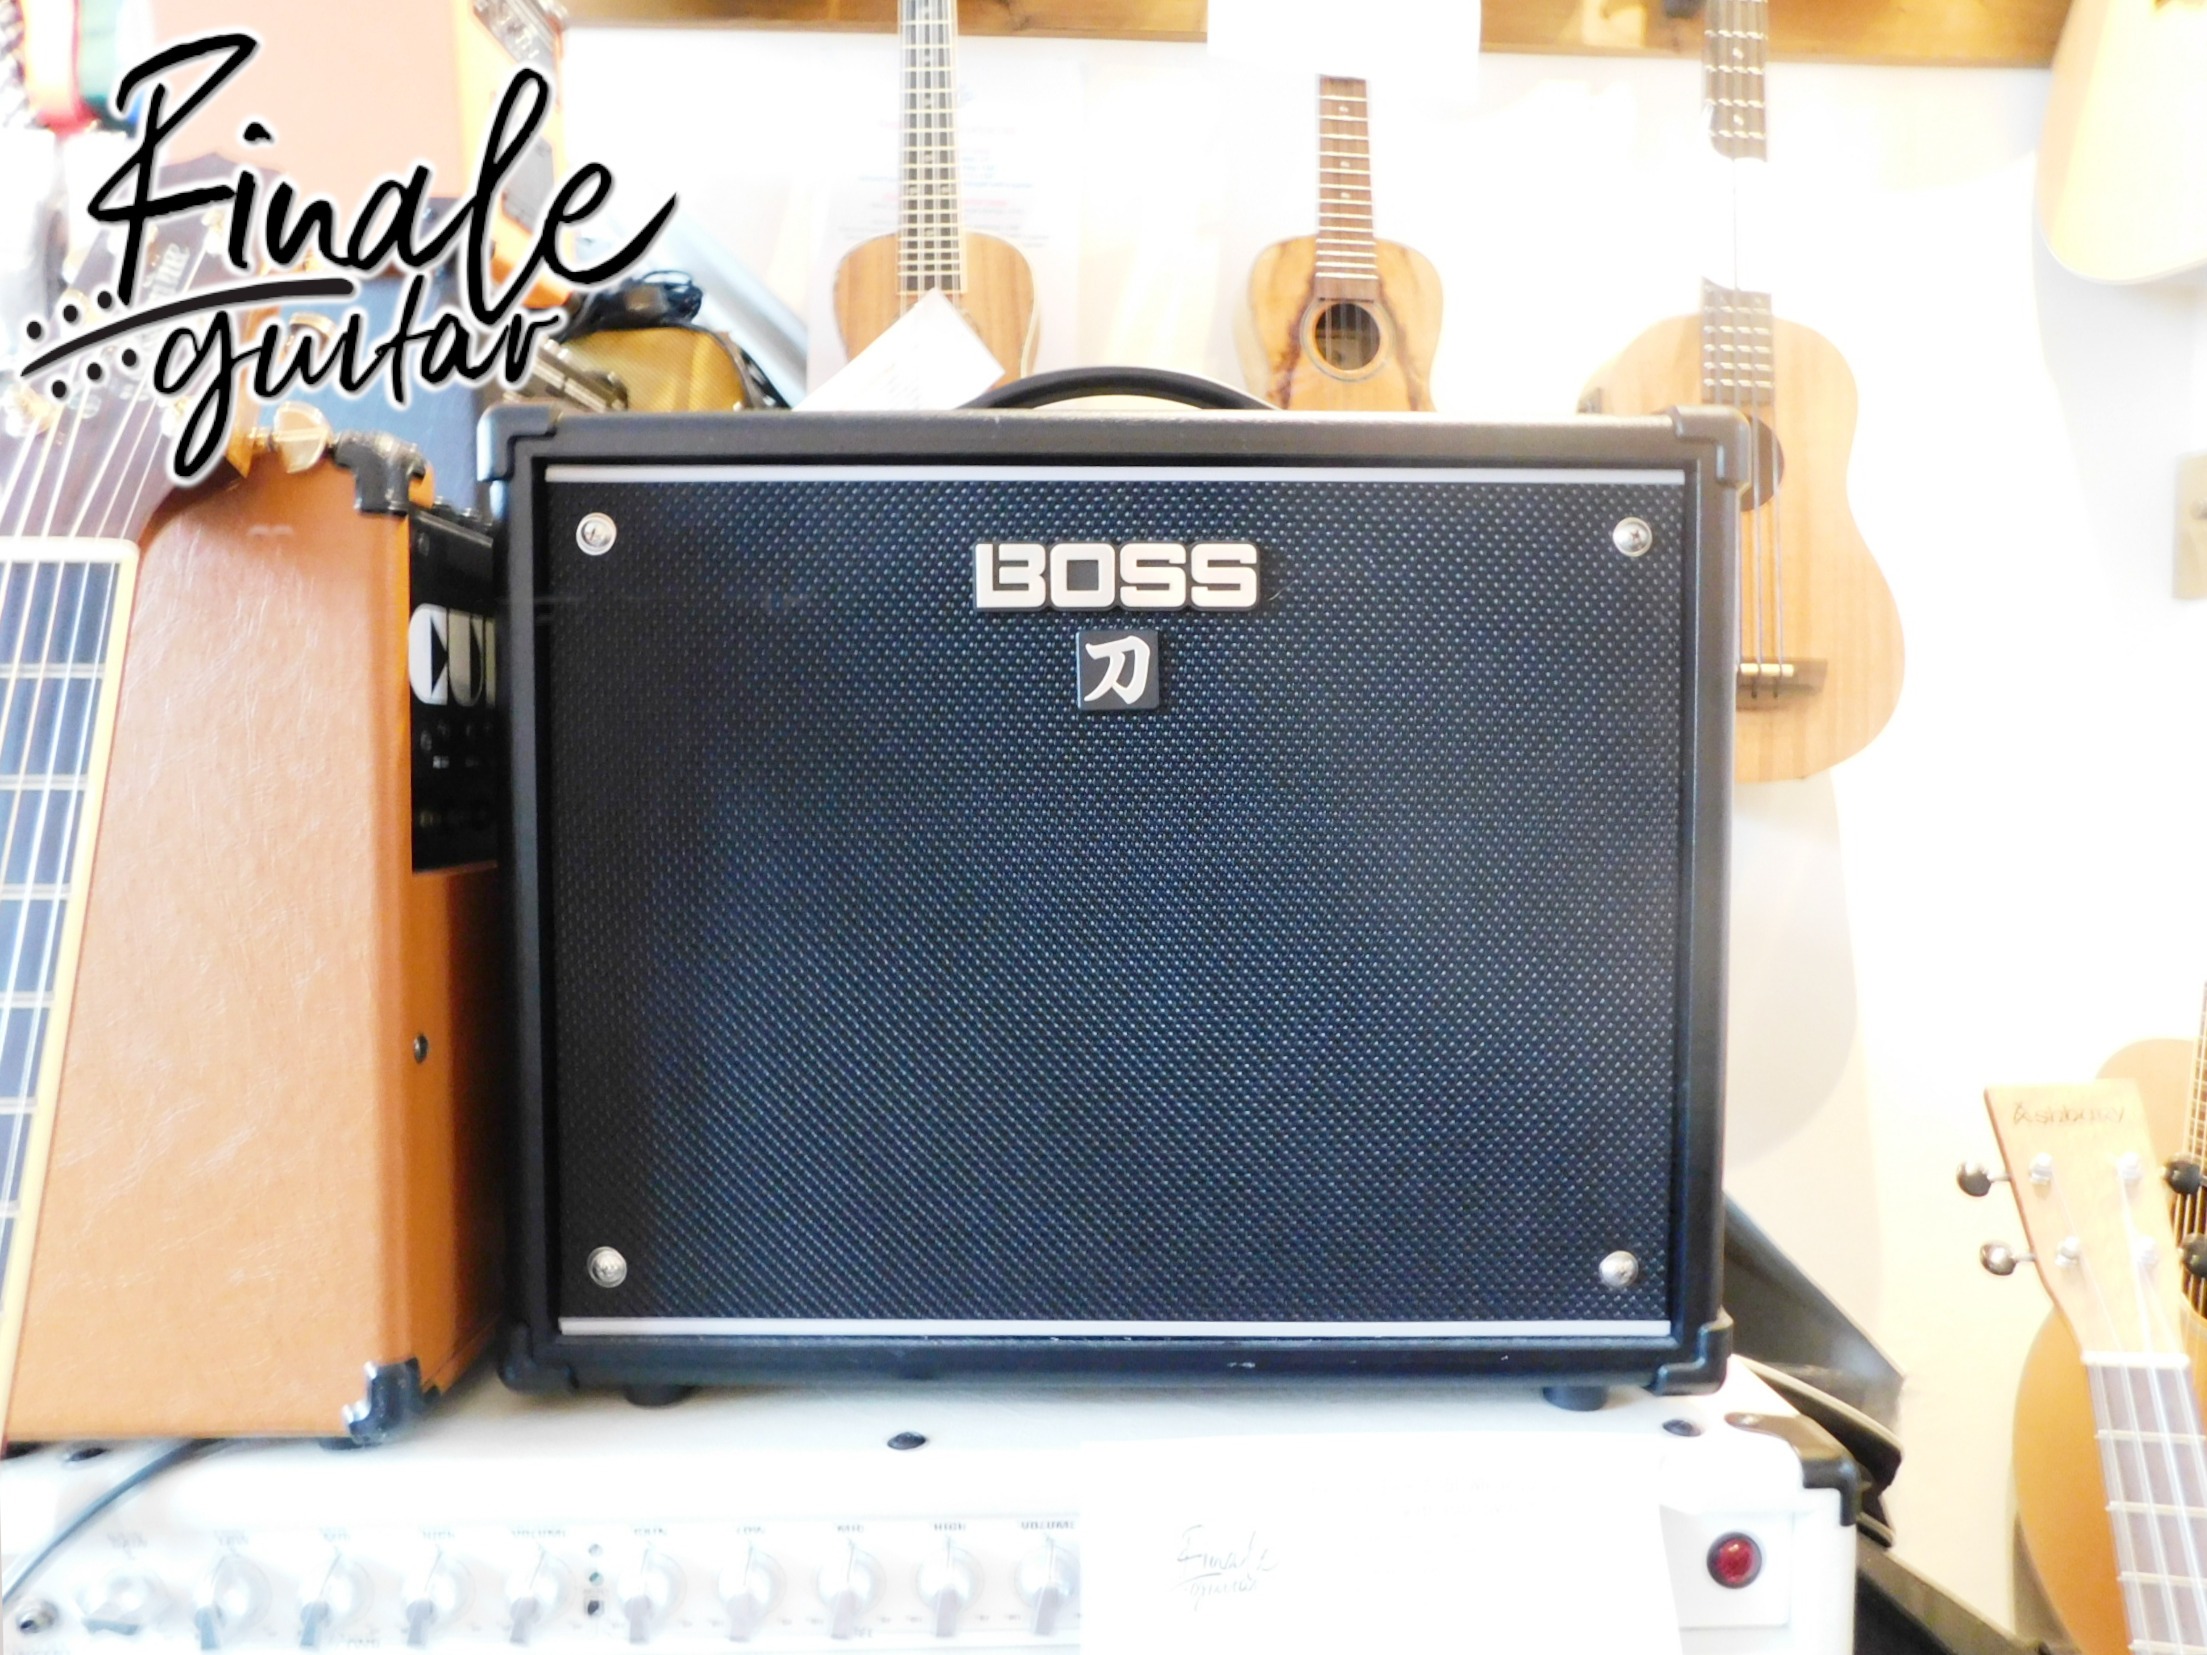 Boss Katana 50w guitar combo for sale in our Sheffield shop